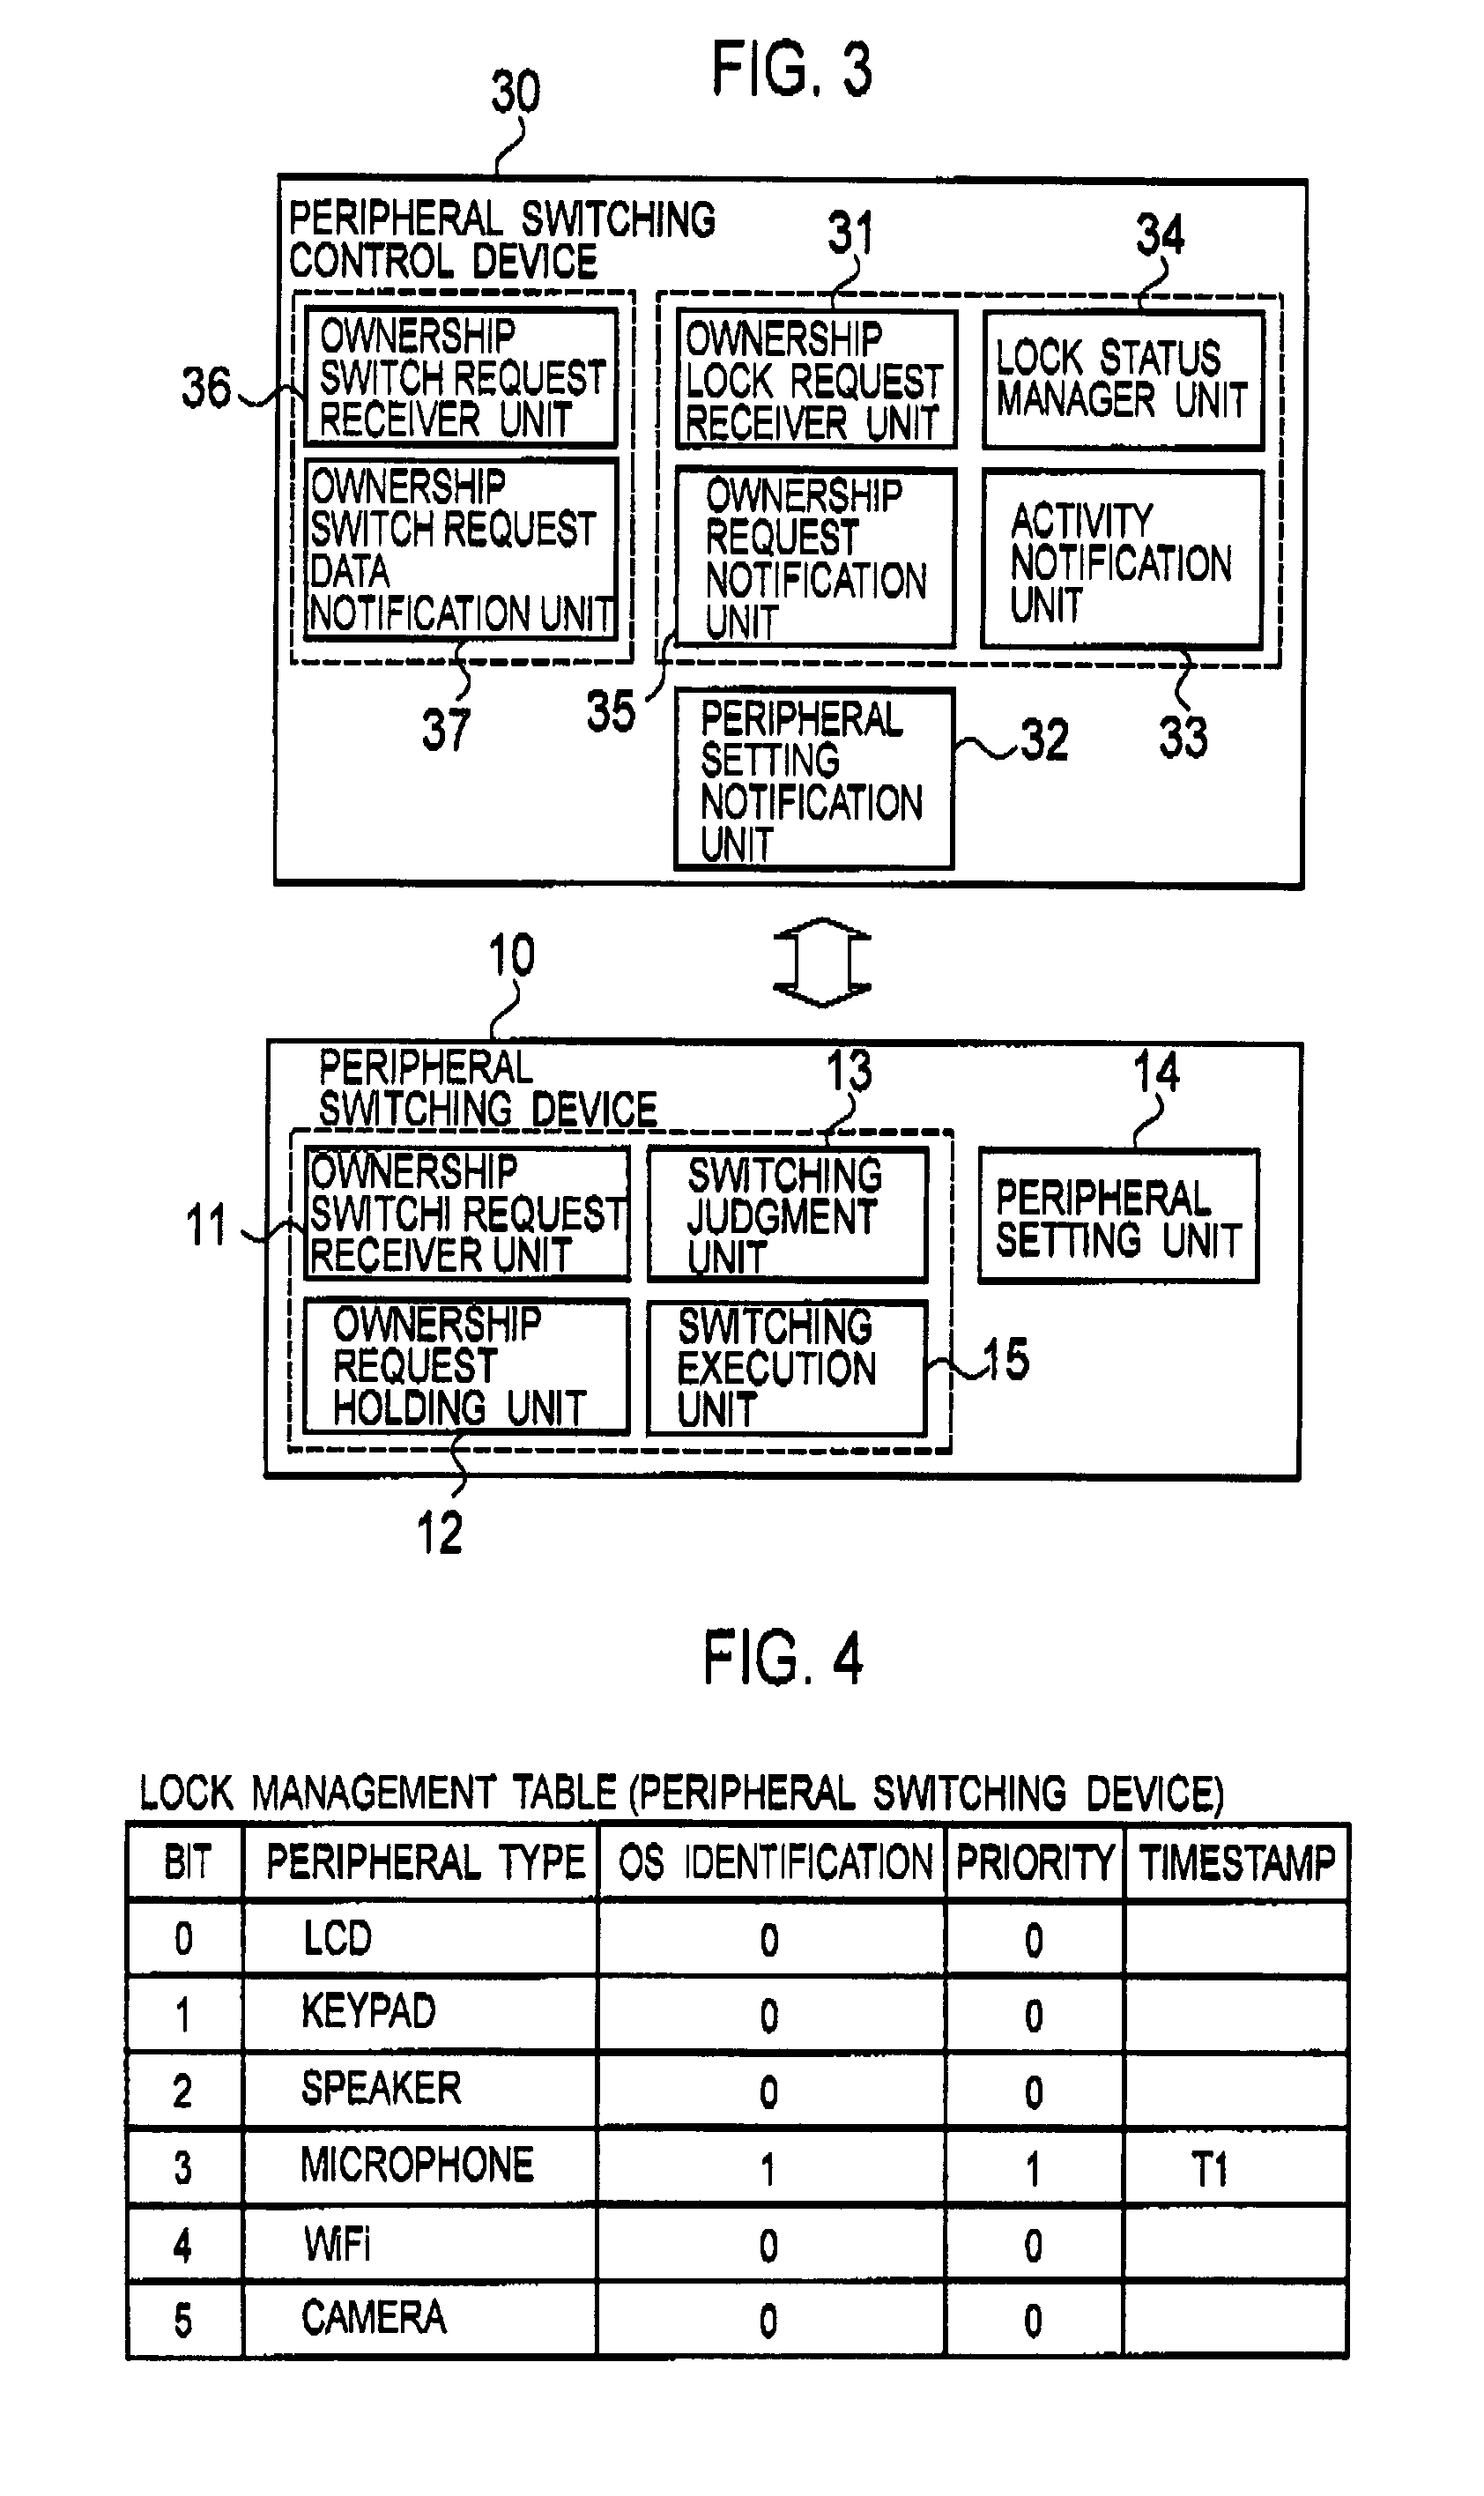 Peripheral switching device and a peripheral switching control device